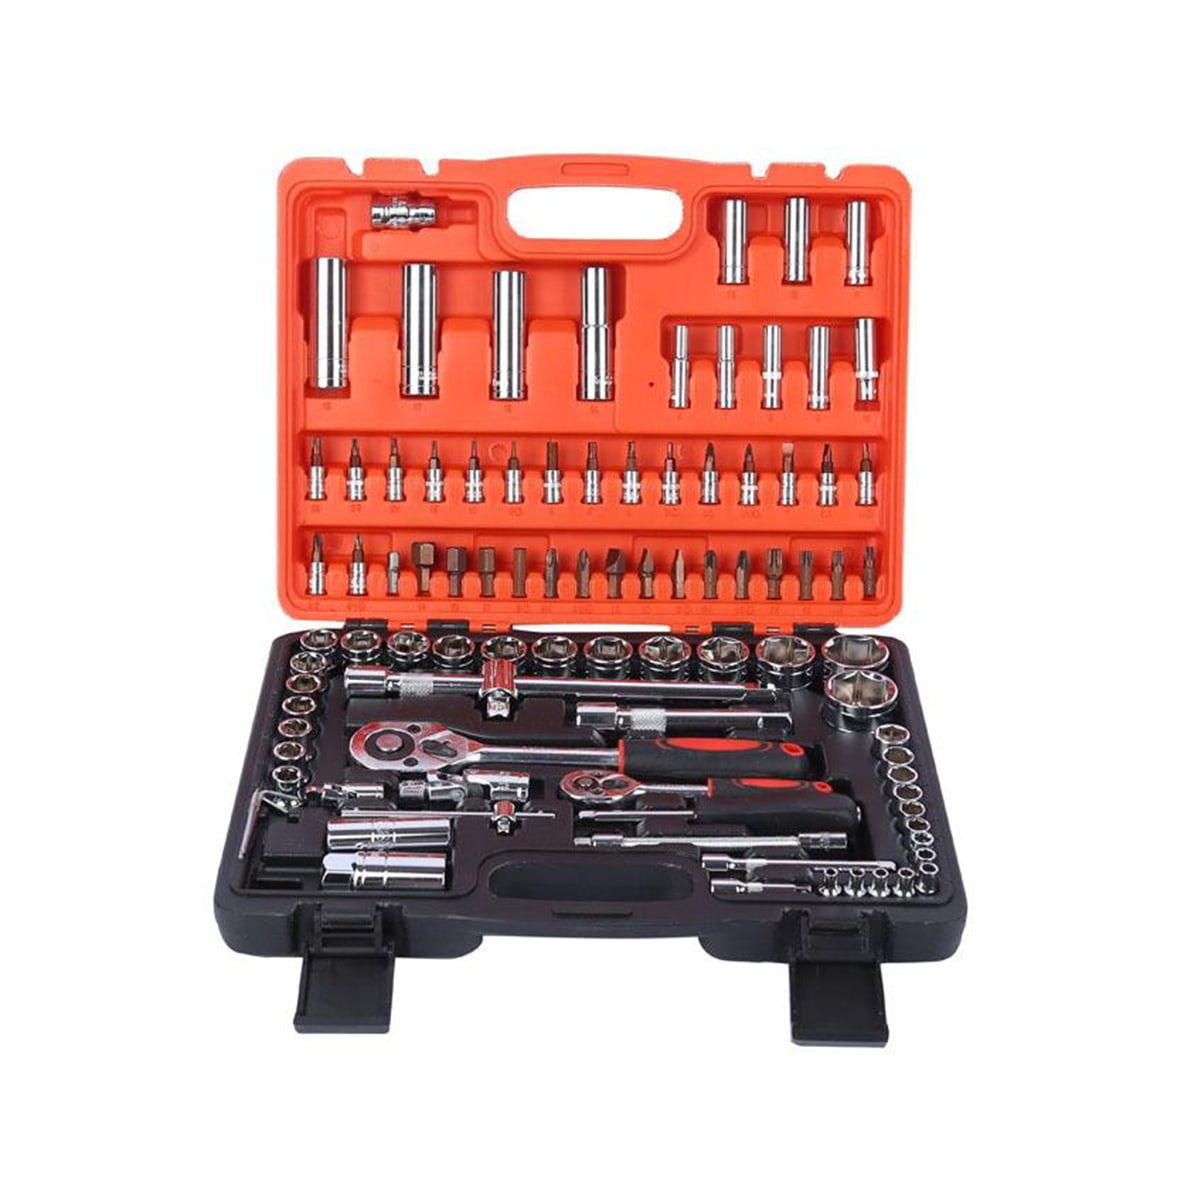 94pcs Automobile Tools Ratchet Wrench Spanner deducto Car Repair Tools Kit